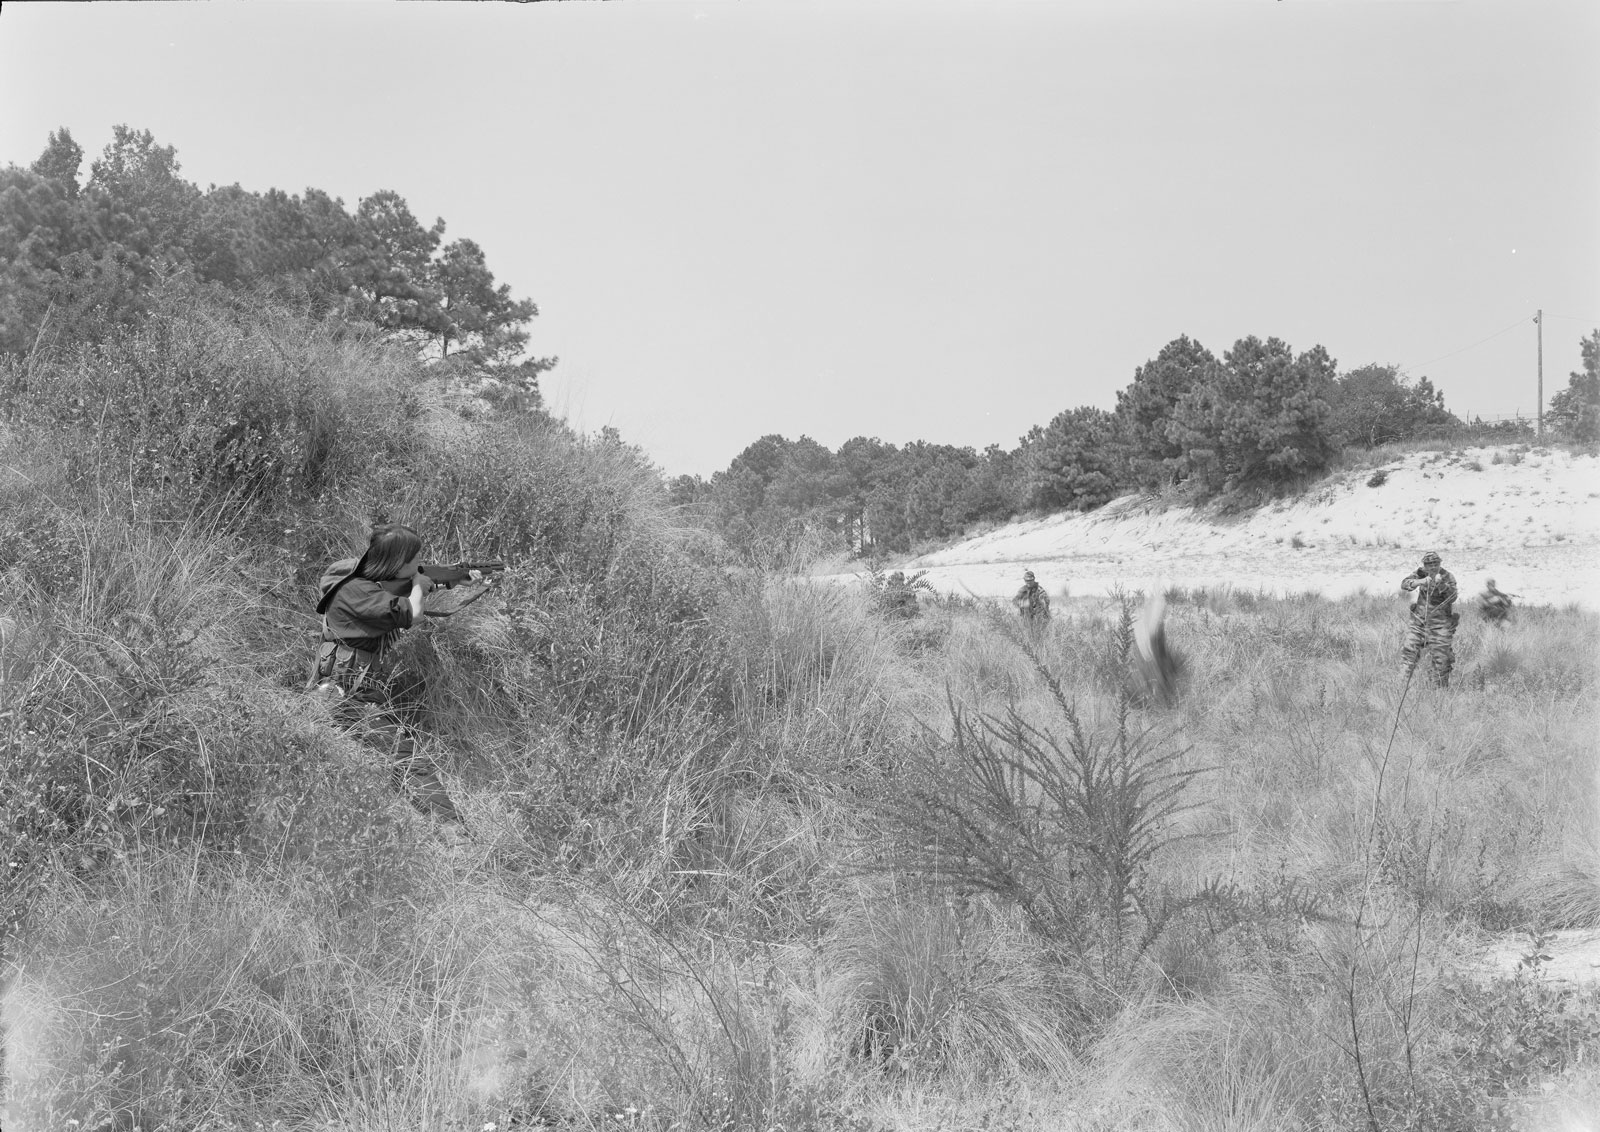 A person crouching in grasses aims a sniper